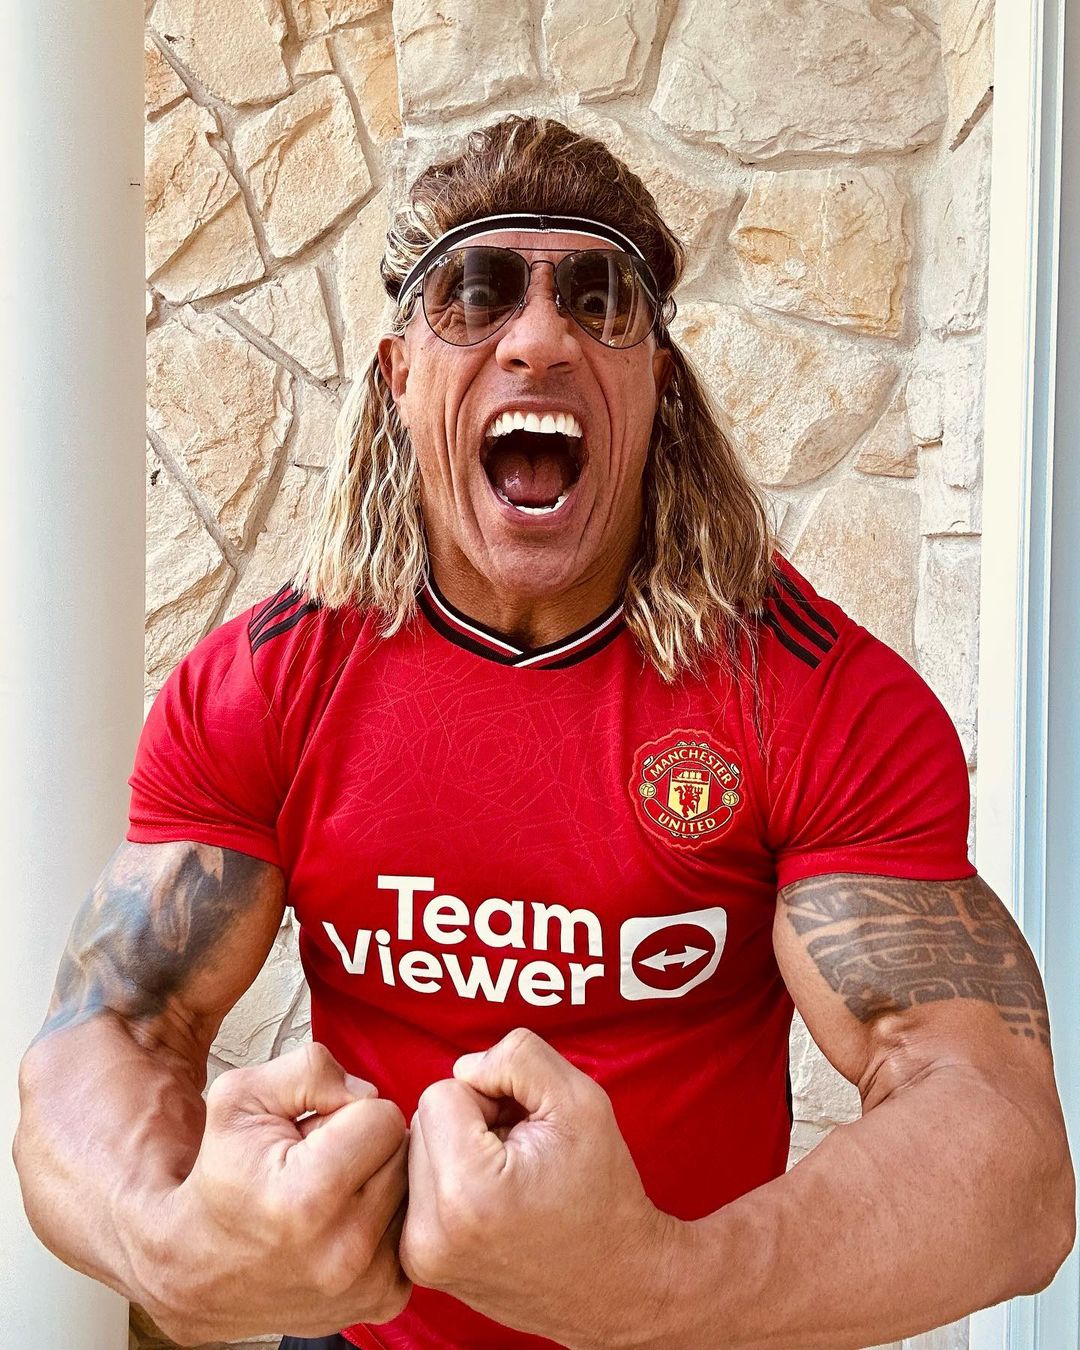 Fans Revealed 4 Big Mistakes In The Rock’s Halloween Costume When Dressing As David Beckham – The Rock